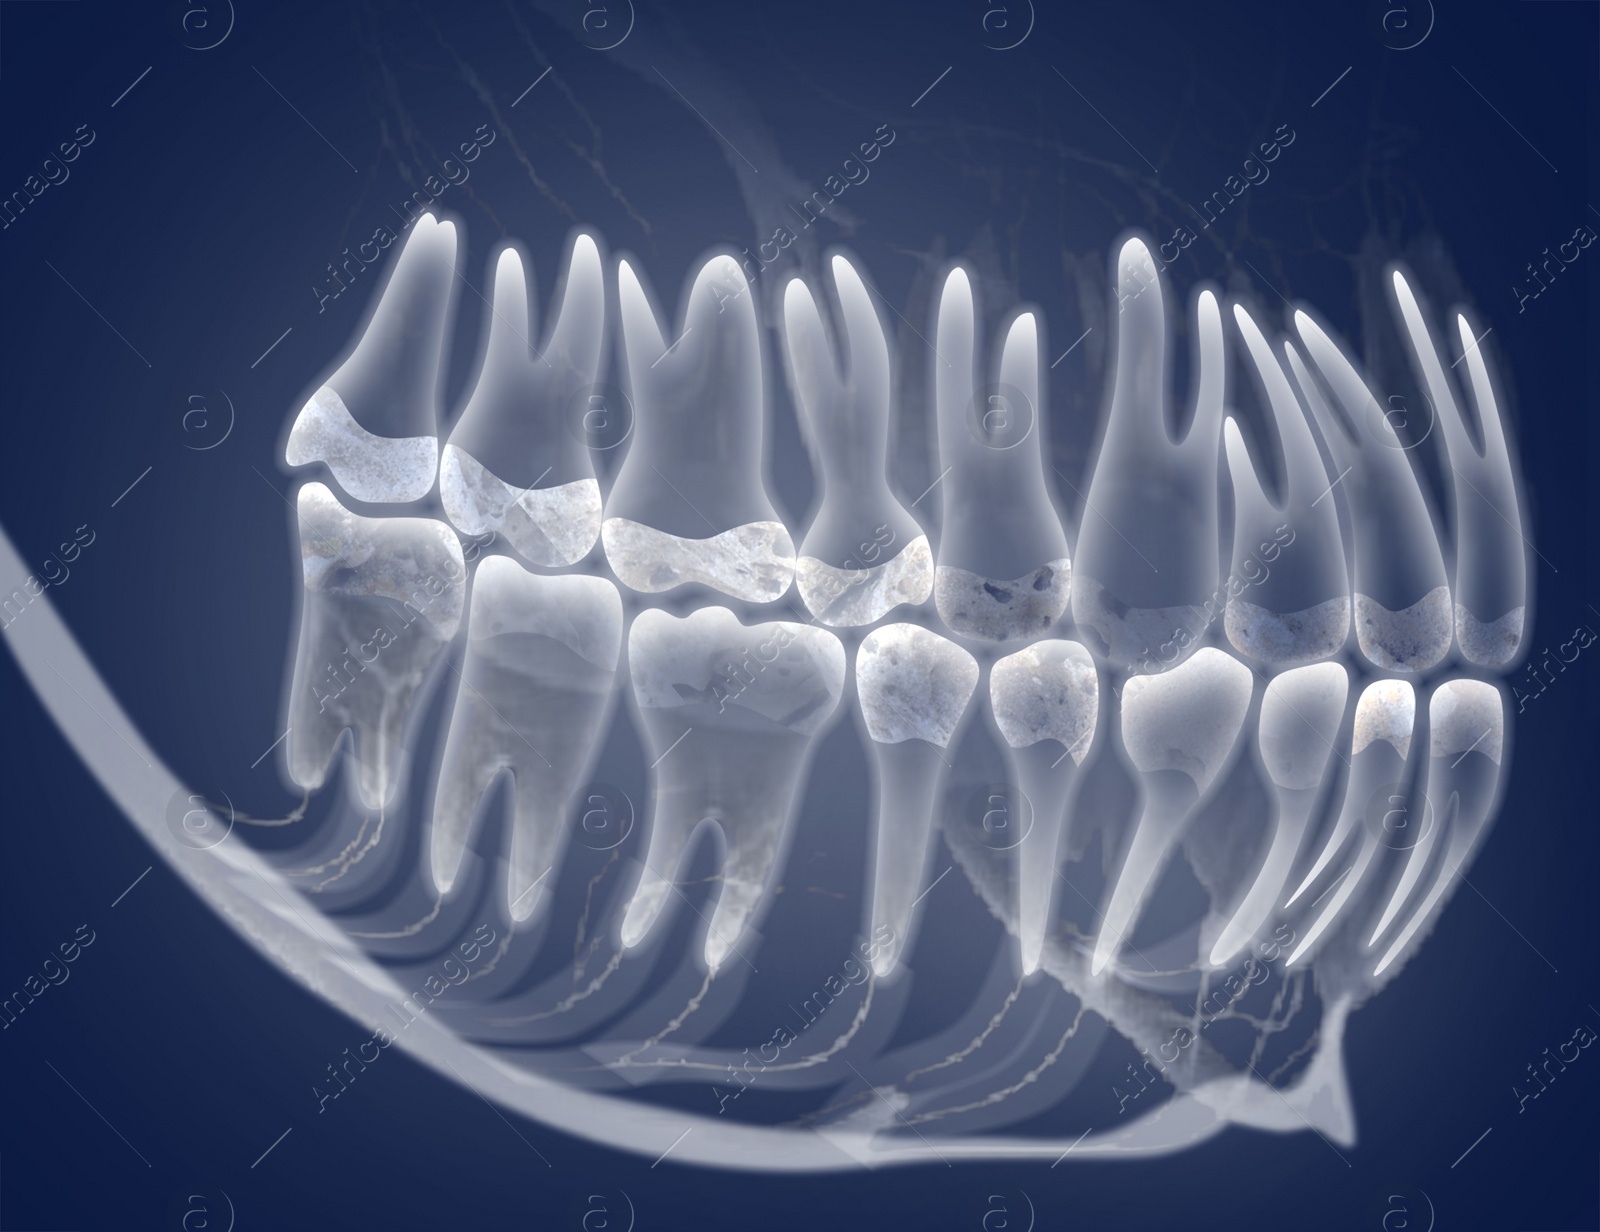 Illustration of X-ray picture of oral cavity with teeth